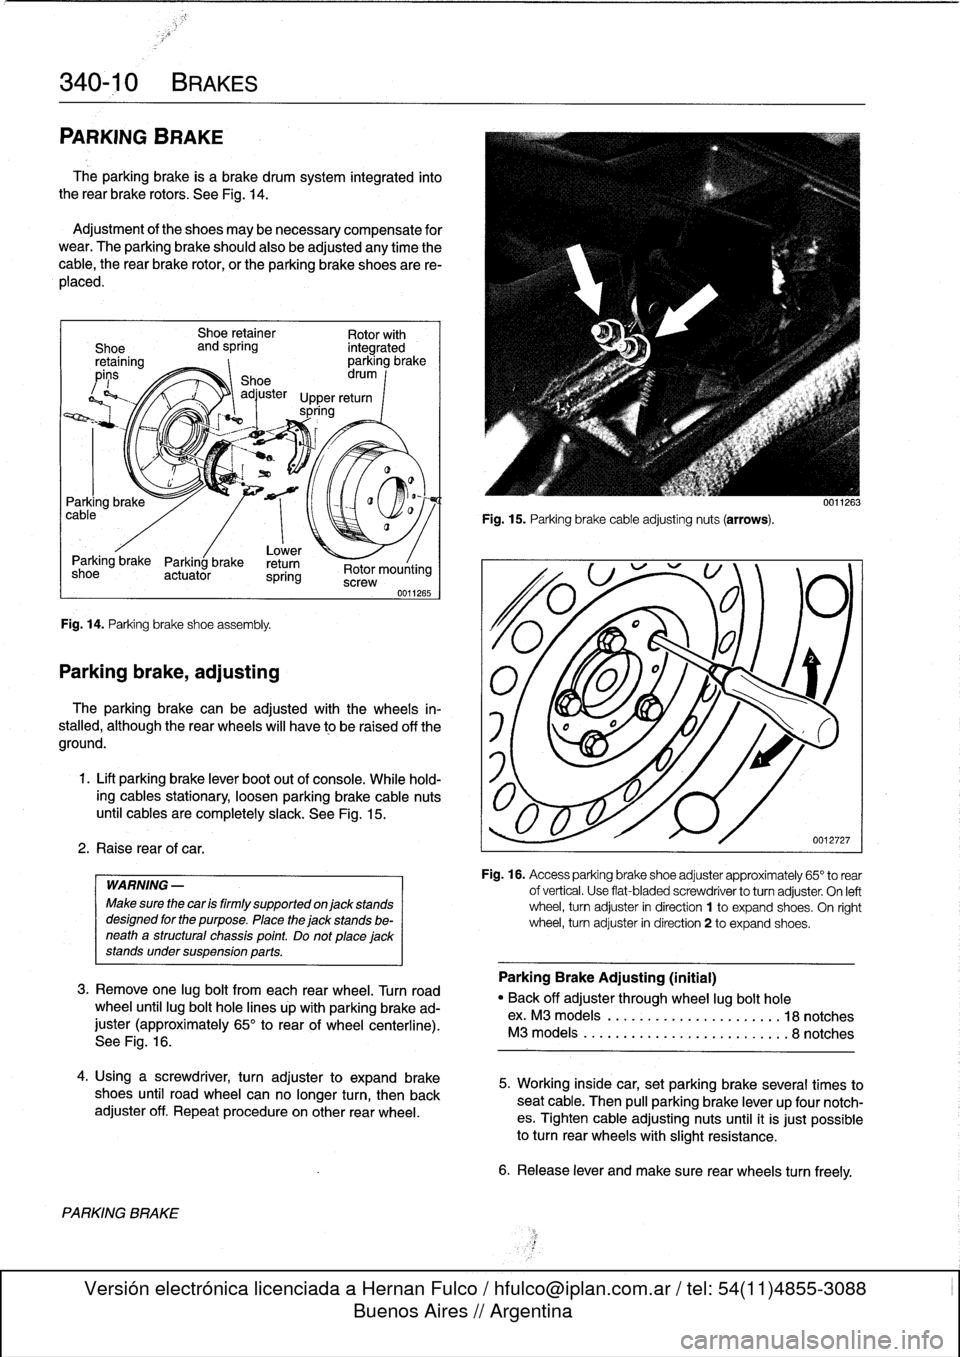 BMW 323i 1995 E36 Workshop Manual 
340-
1
0
BRAKES

PARKING
BRAKE

The
parking
brake
is
a
brake
drum
system
integrated
into
the
rear
brake
rotors
.
See
Fig
.
14
.

Adjustment
of
the
shoes
may
benecessary
compensate
for
wear
.
The
park